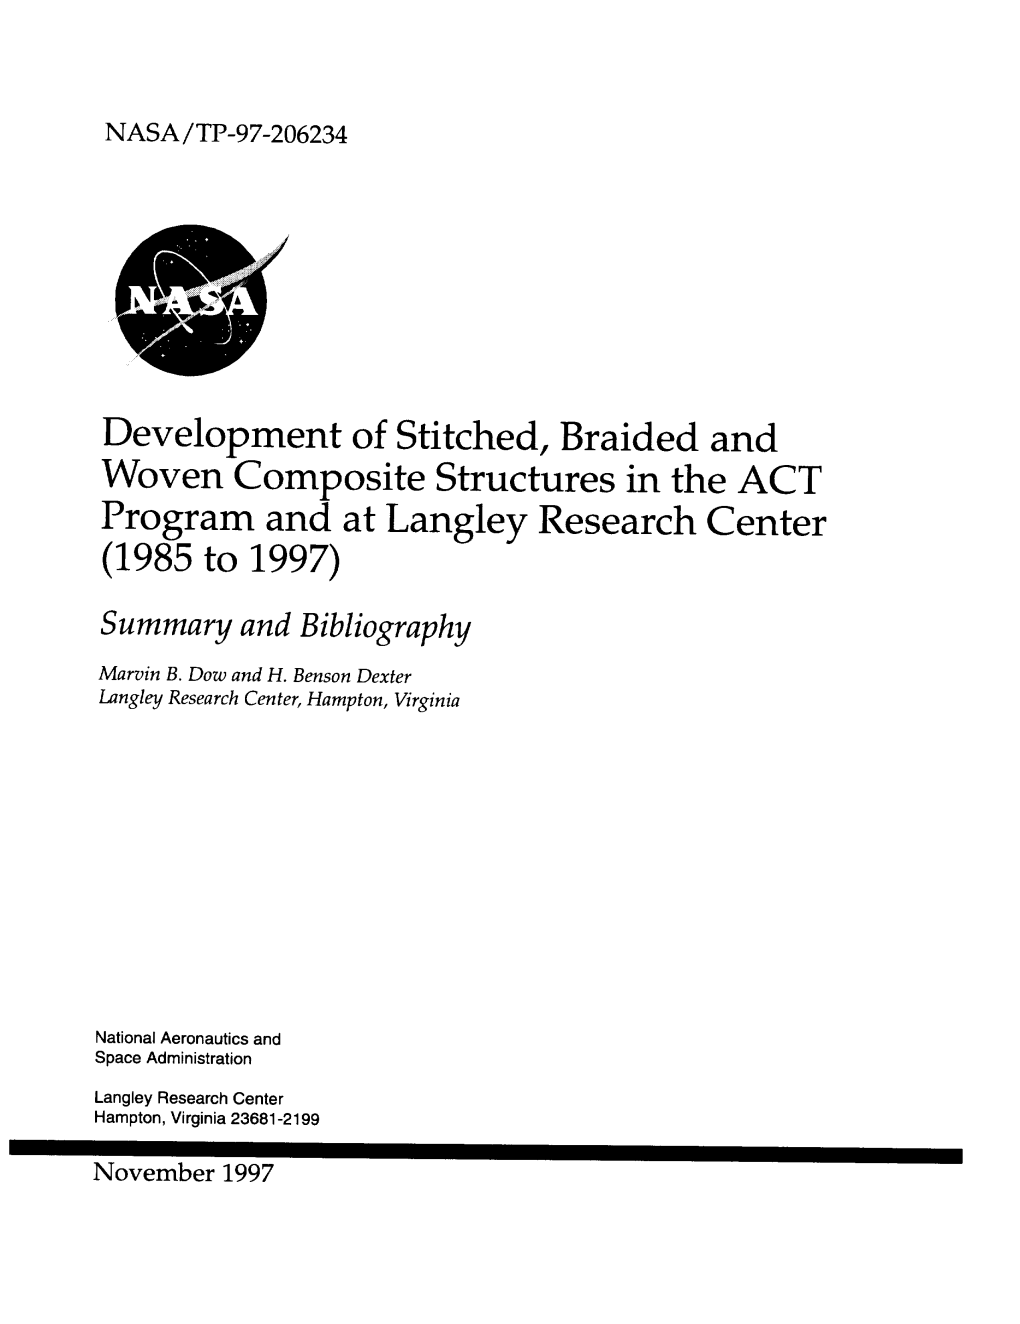 Development of Stitched, Braided and Woven Composite Structures in the ACT Program and at Langley Research Center (1985 to 1997)